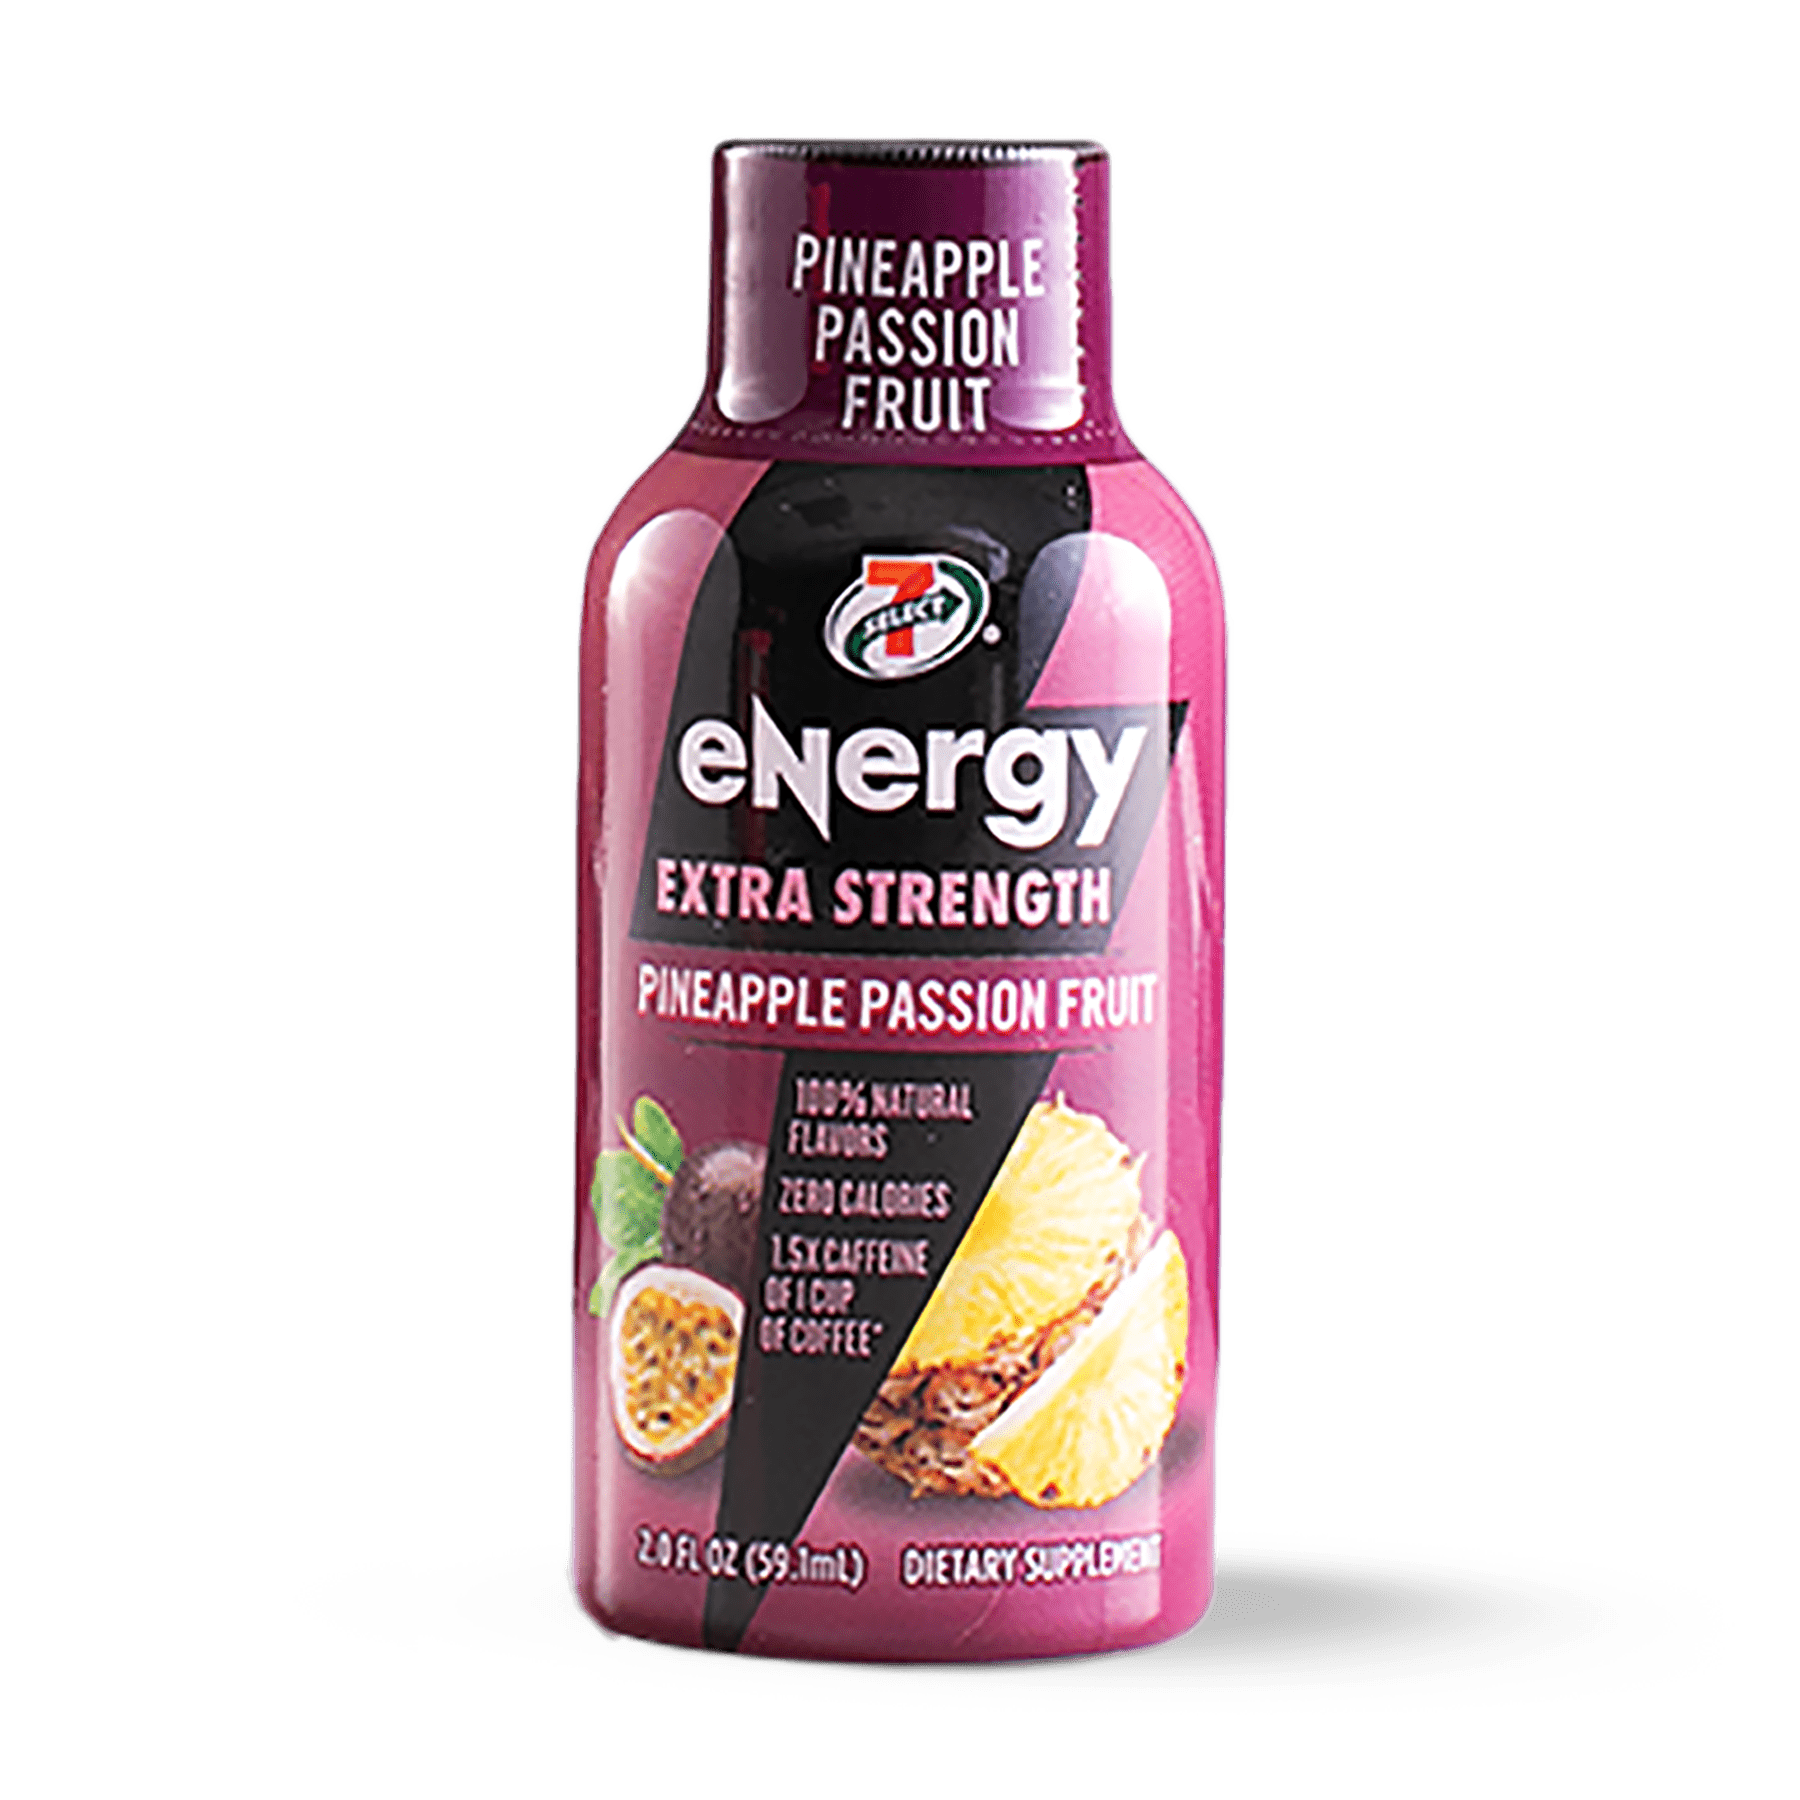 A single bottle of 7-Select extra strength energy shot in pineapple passionfruit flavor